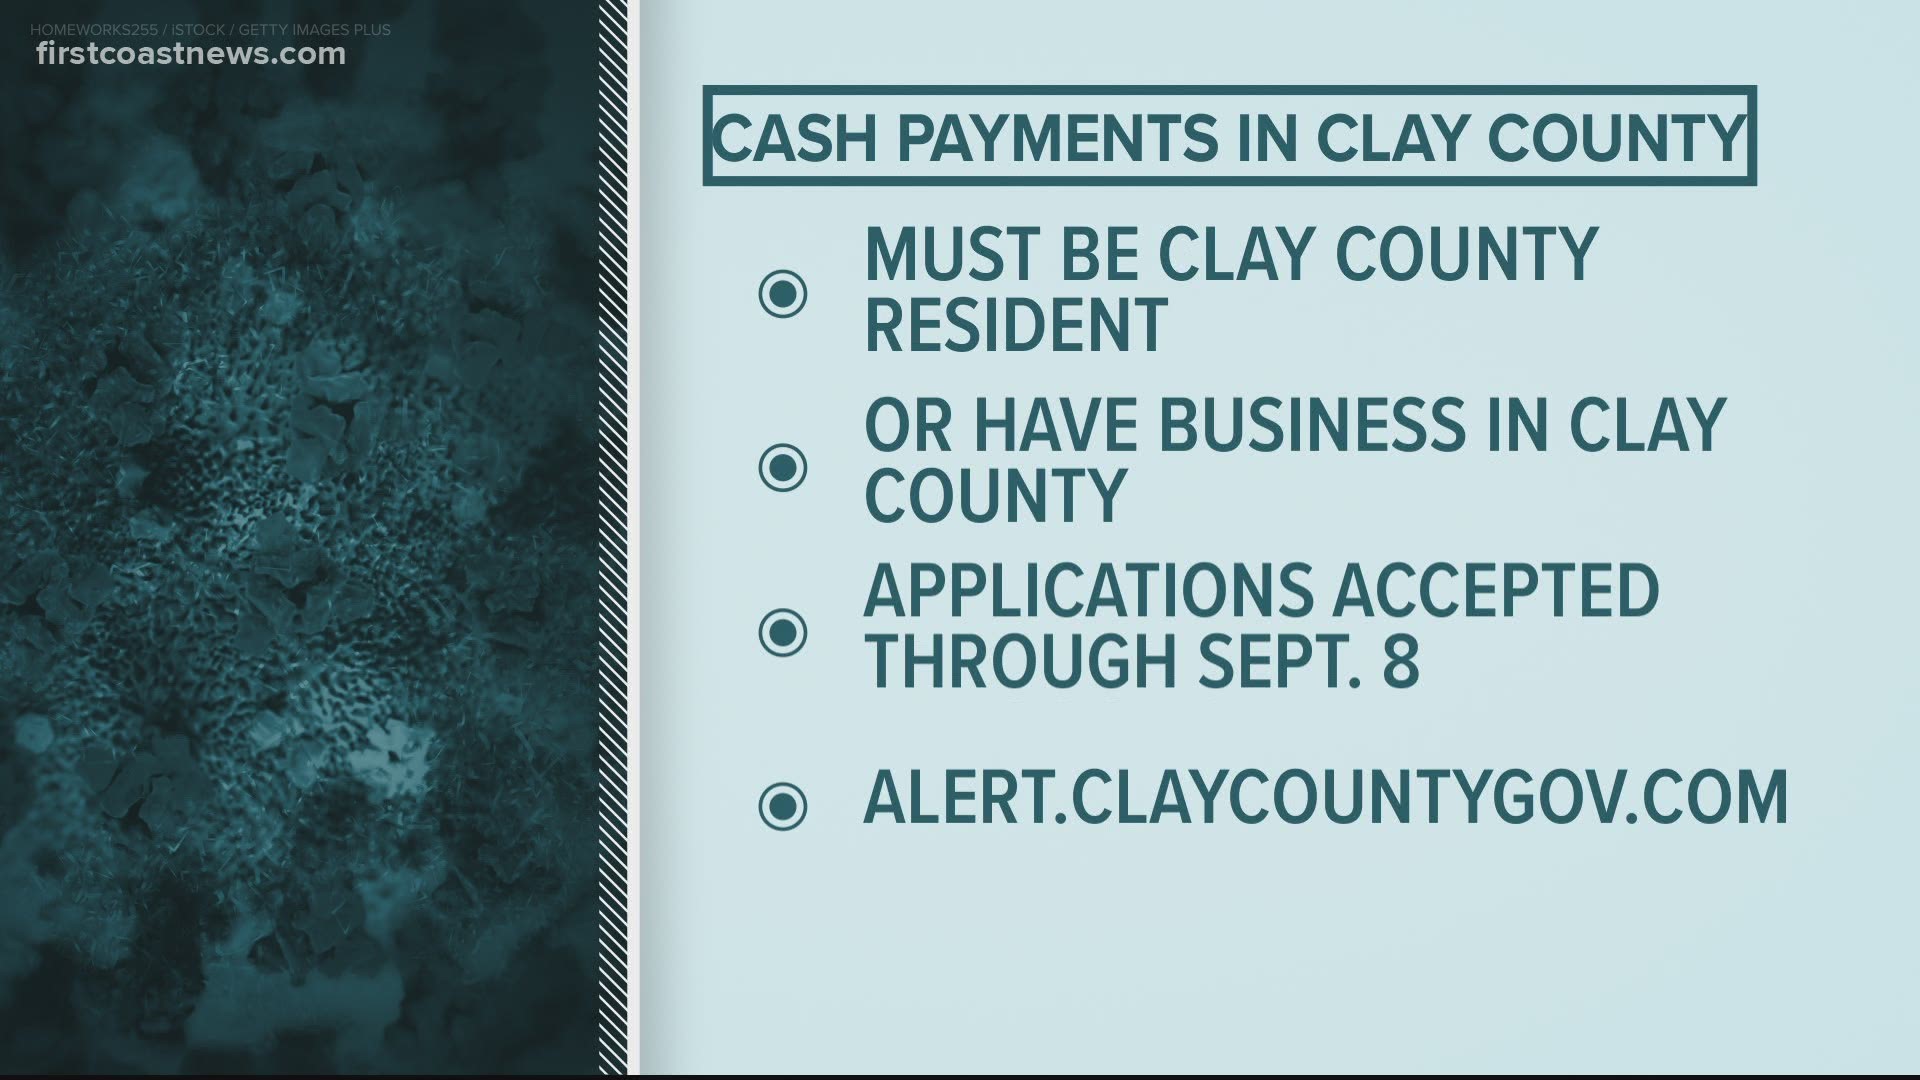 Grants for Clay County residents who have suffered an economic hardship are available in the form of a one-time cash payment of up to $1,000.